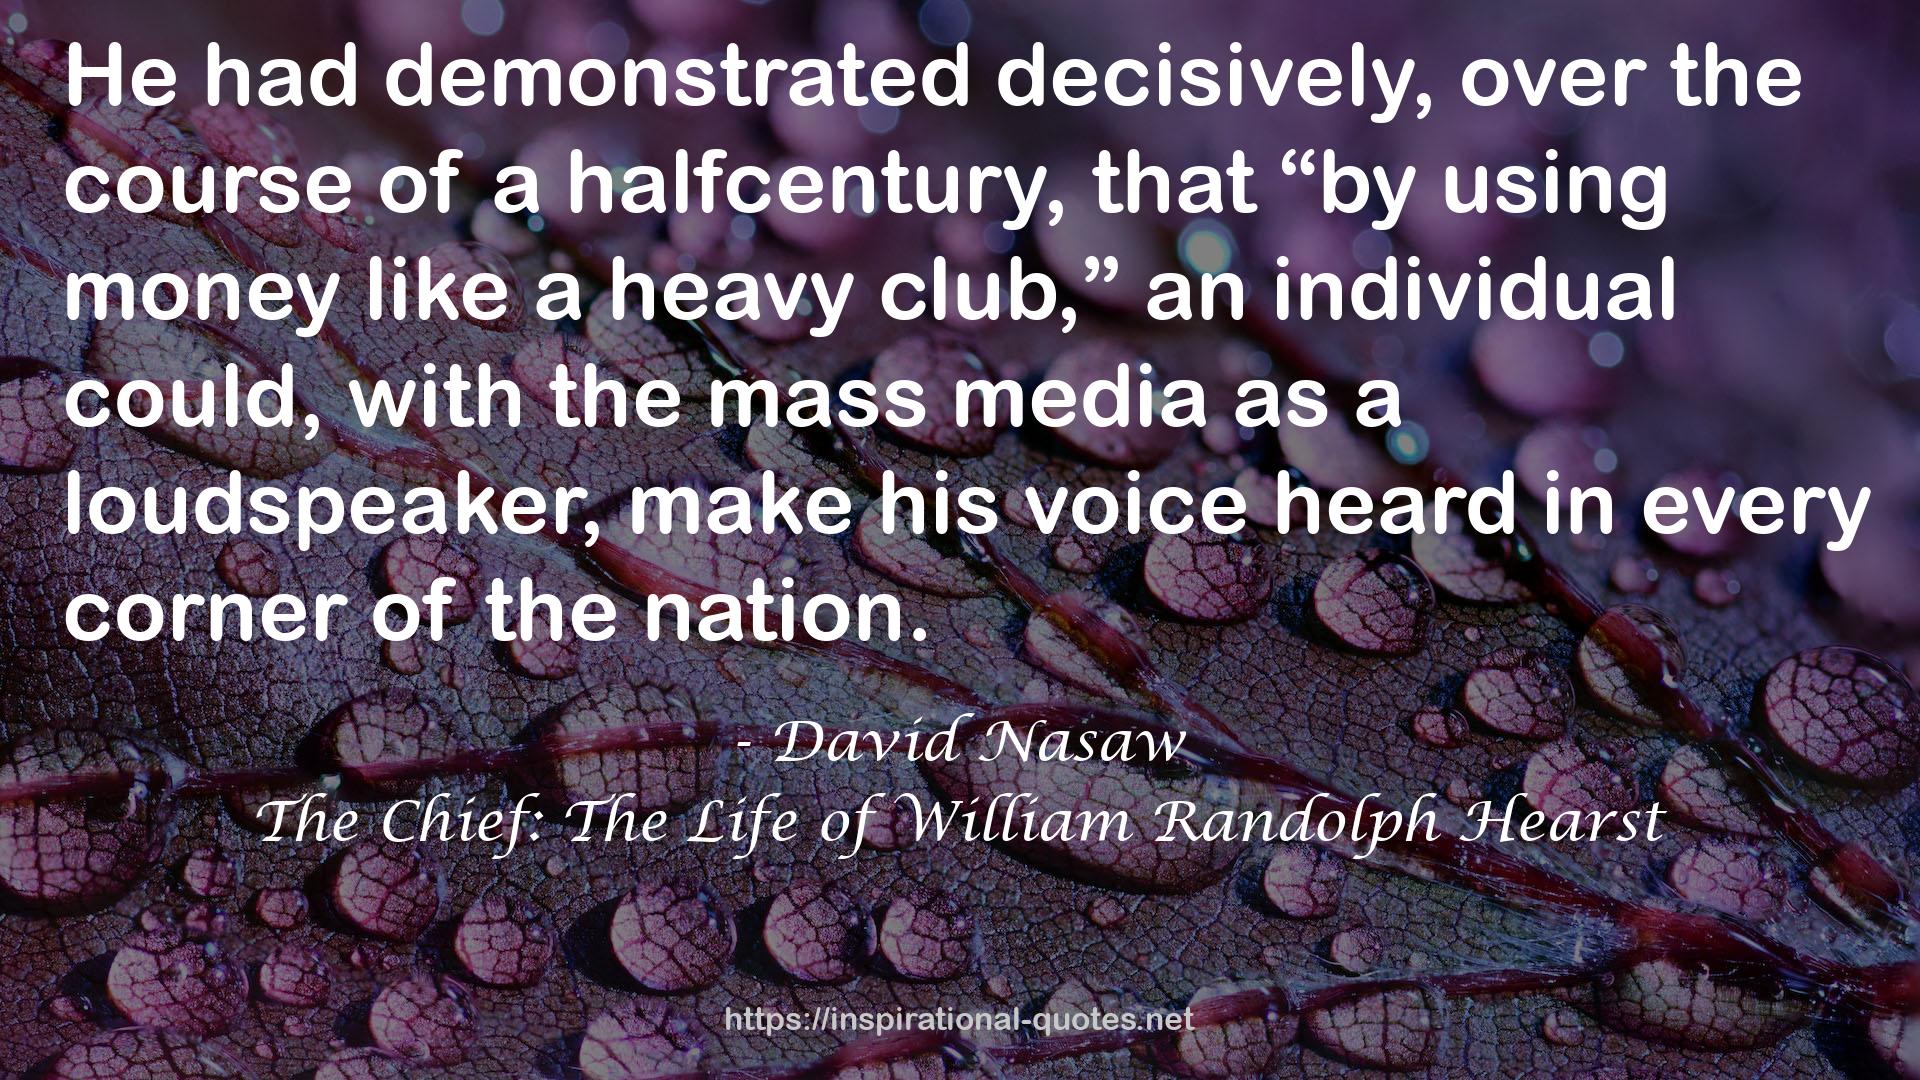 The Chief: The Life of William Randolph Hearst QUOTES